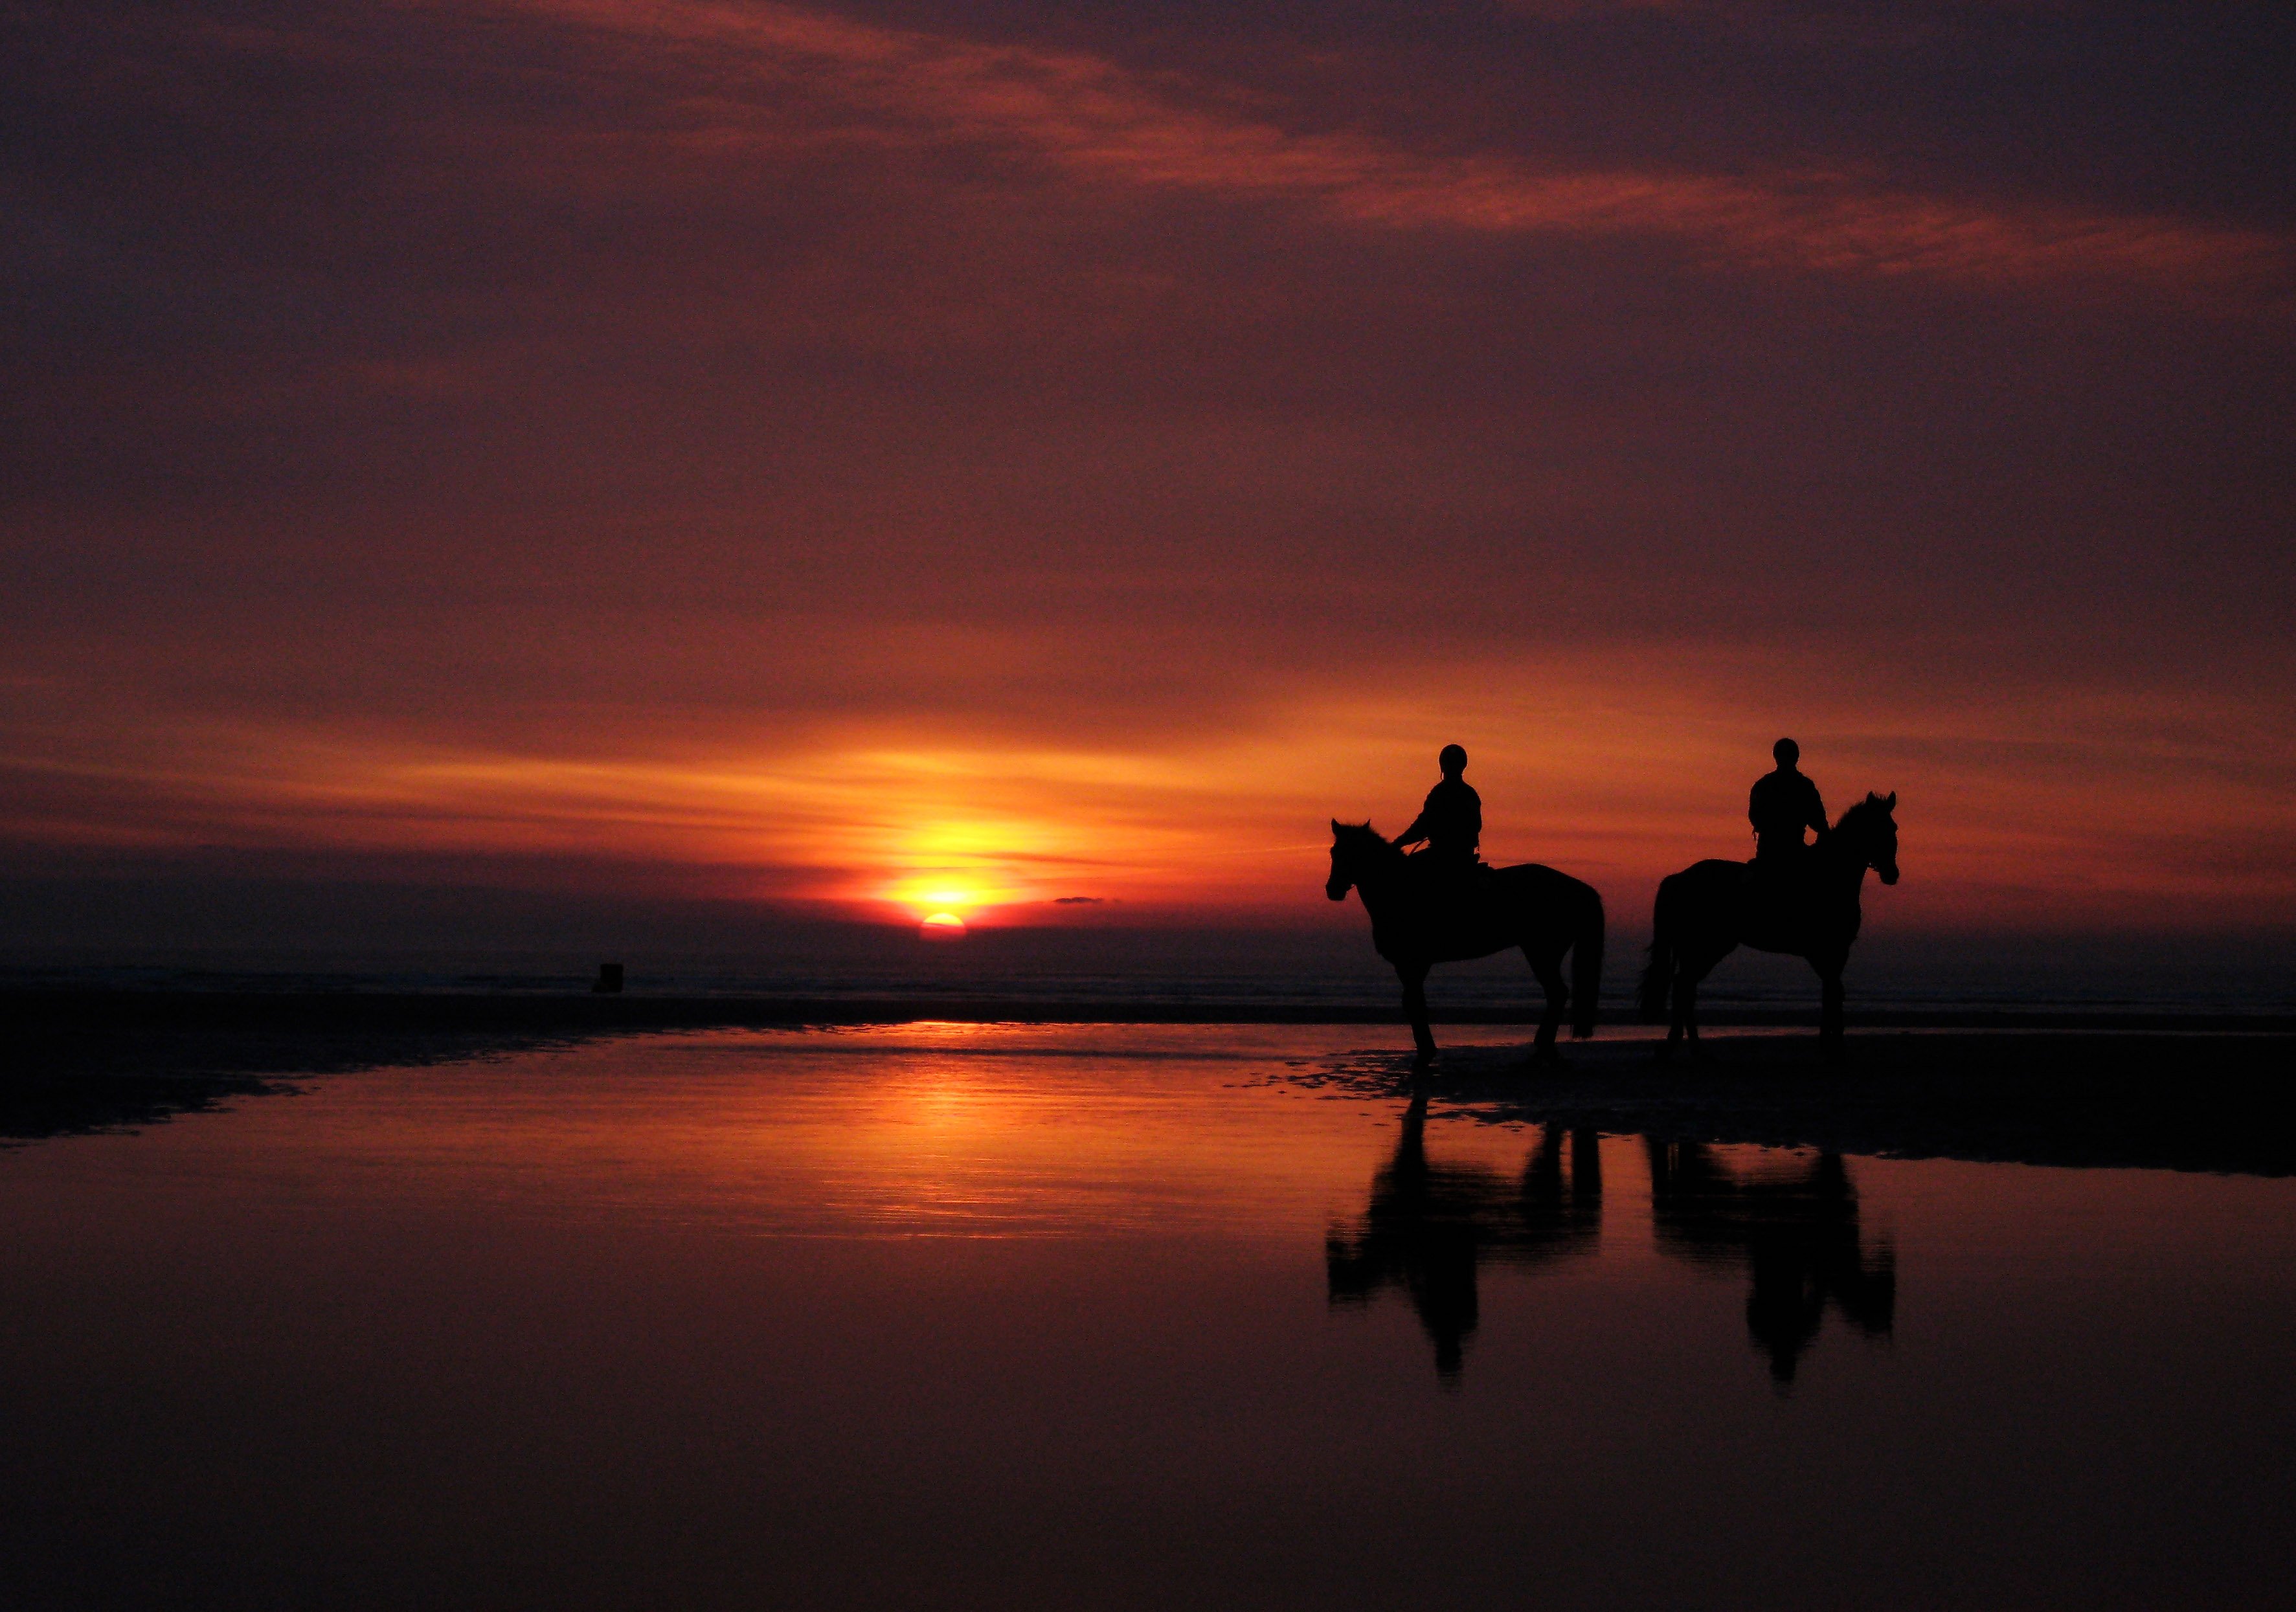 the, Horses, The, Riders, The, Beach, The, West, Of, The, Sun Wallpaper